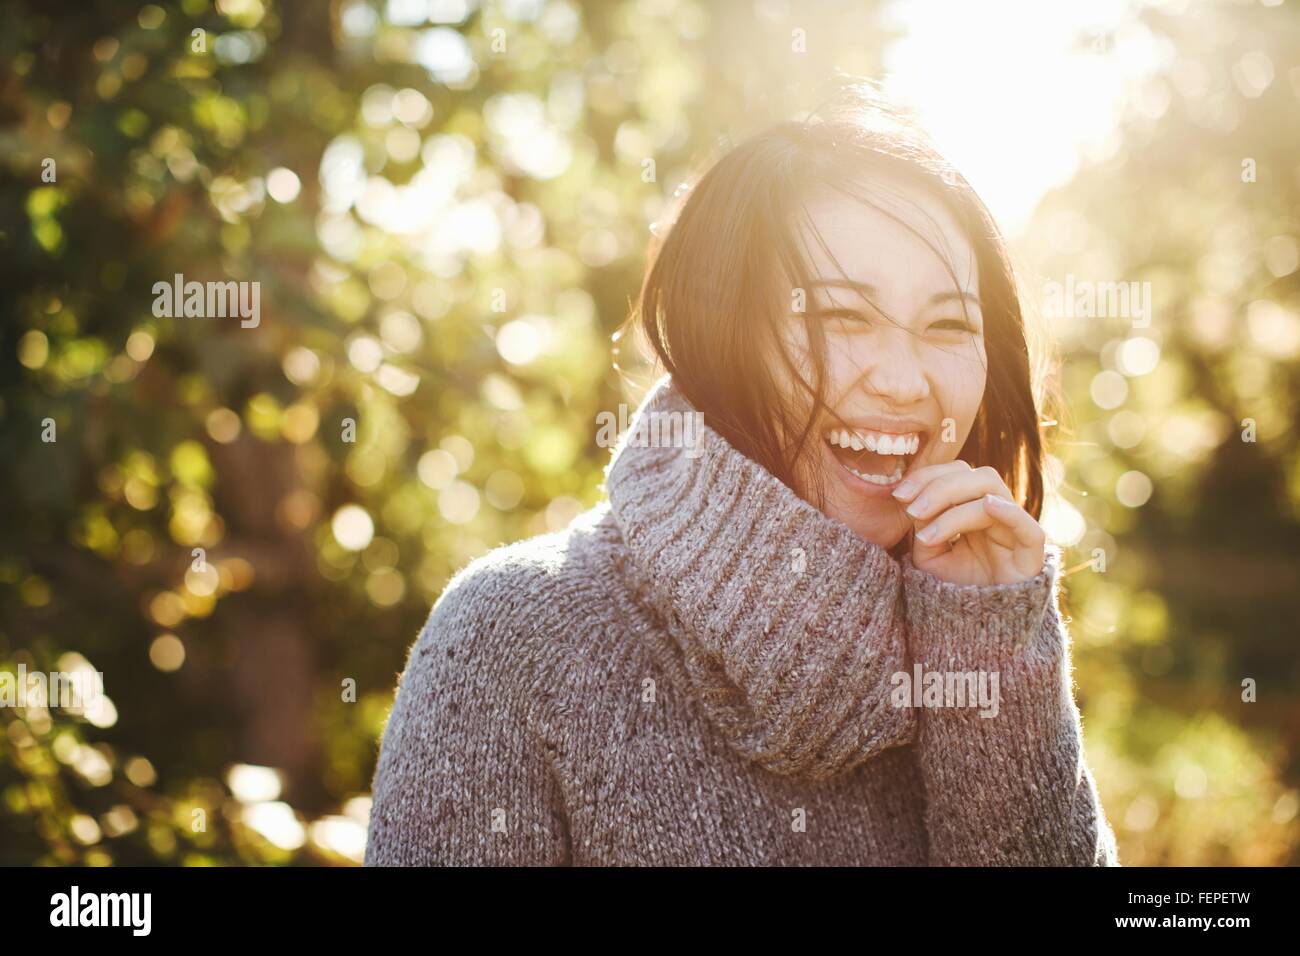 Portrait of young woman in rural environment, laughing Stock Photo